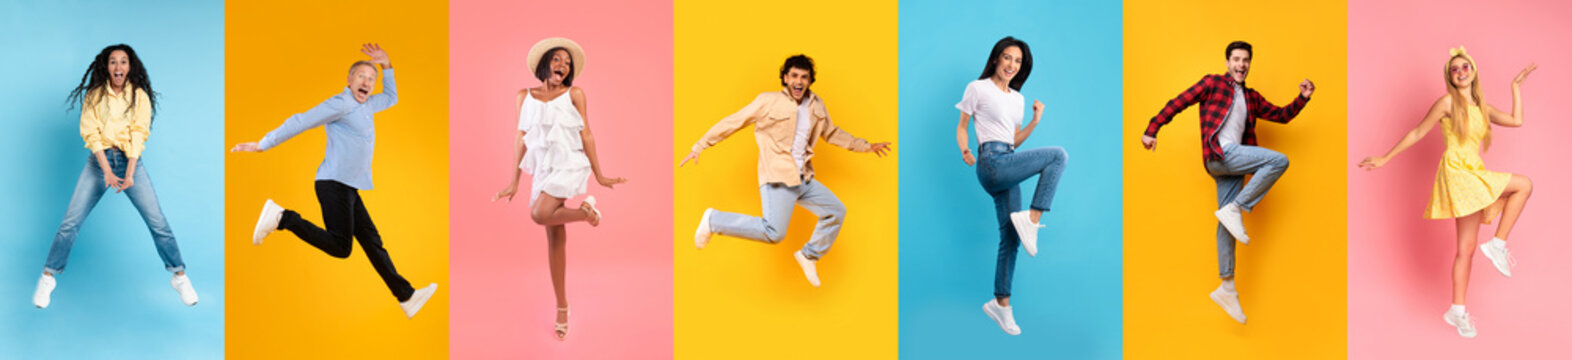 Cheerful People. Set Of Happy Men And Women Jumping On Colorful Backgrounds © Prostock-studio